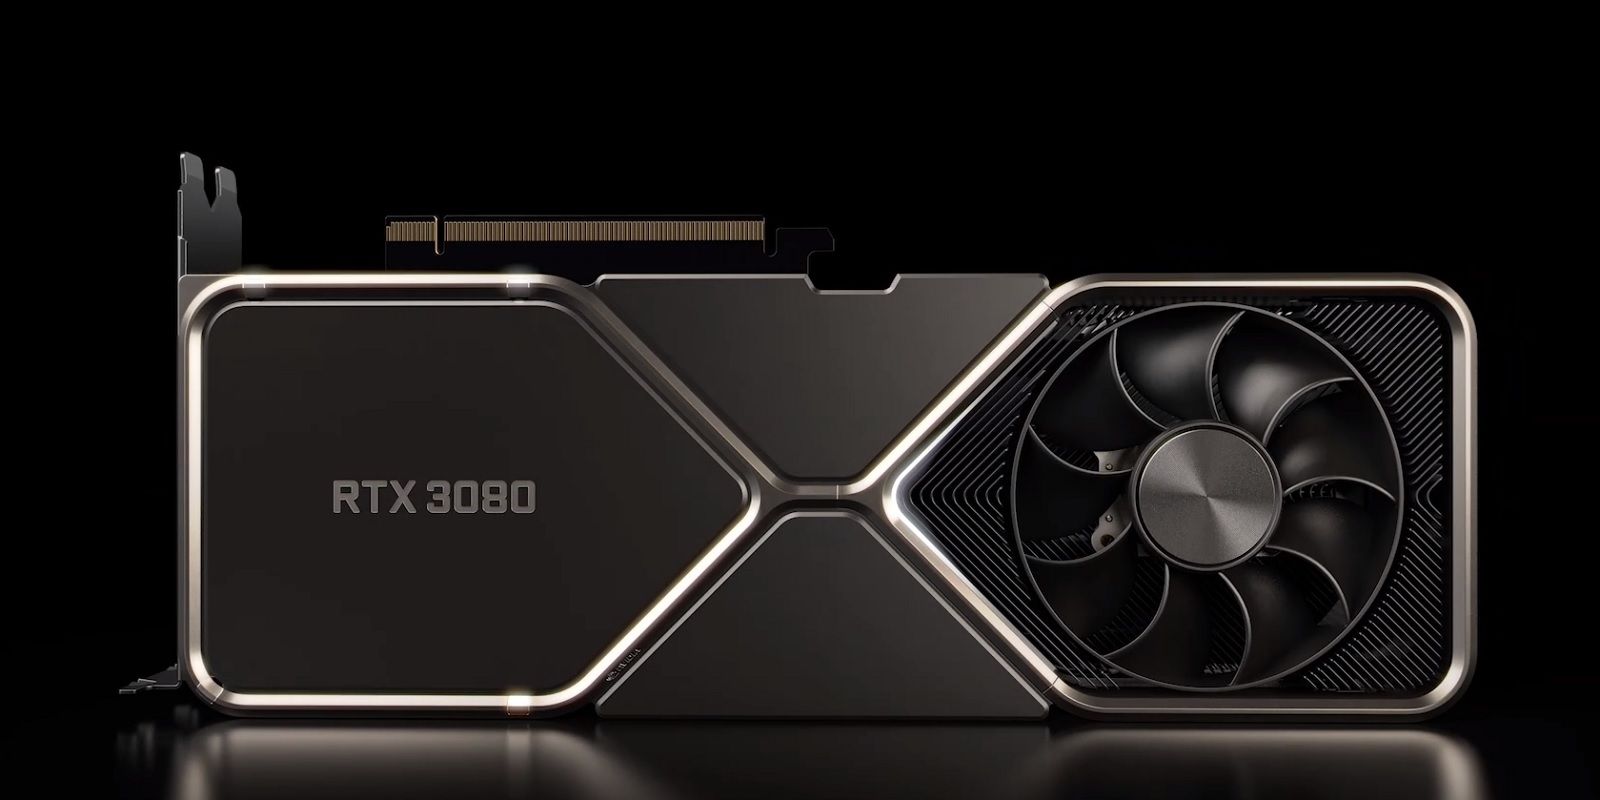 Nvidia GeForce RTX 3080 Benchmarks Show Huge Performance Gains Over RTX 2080